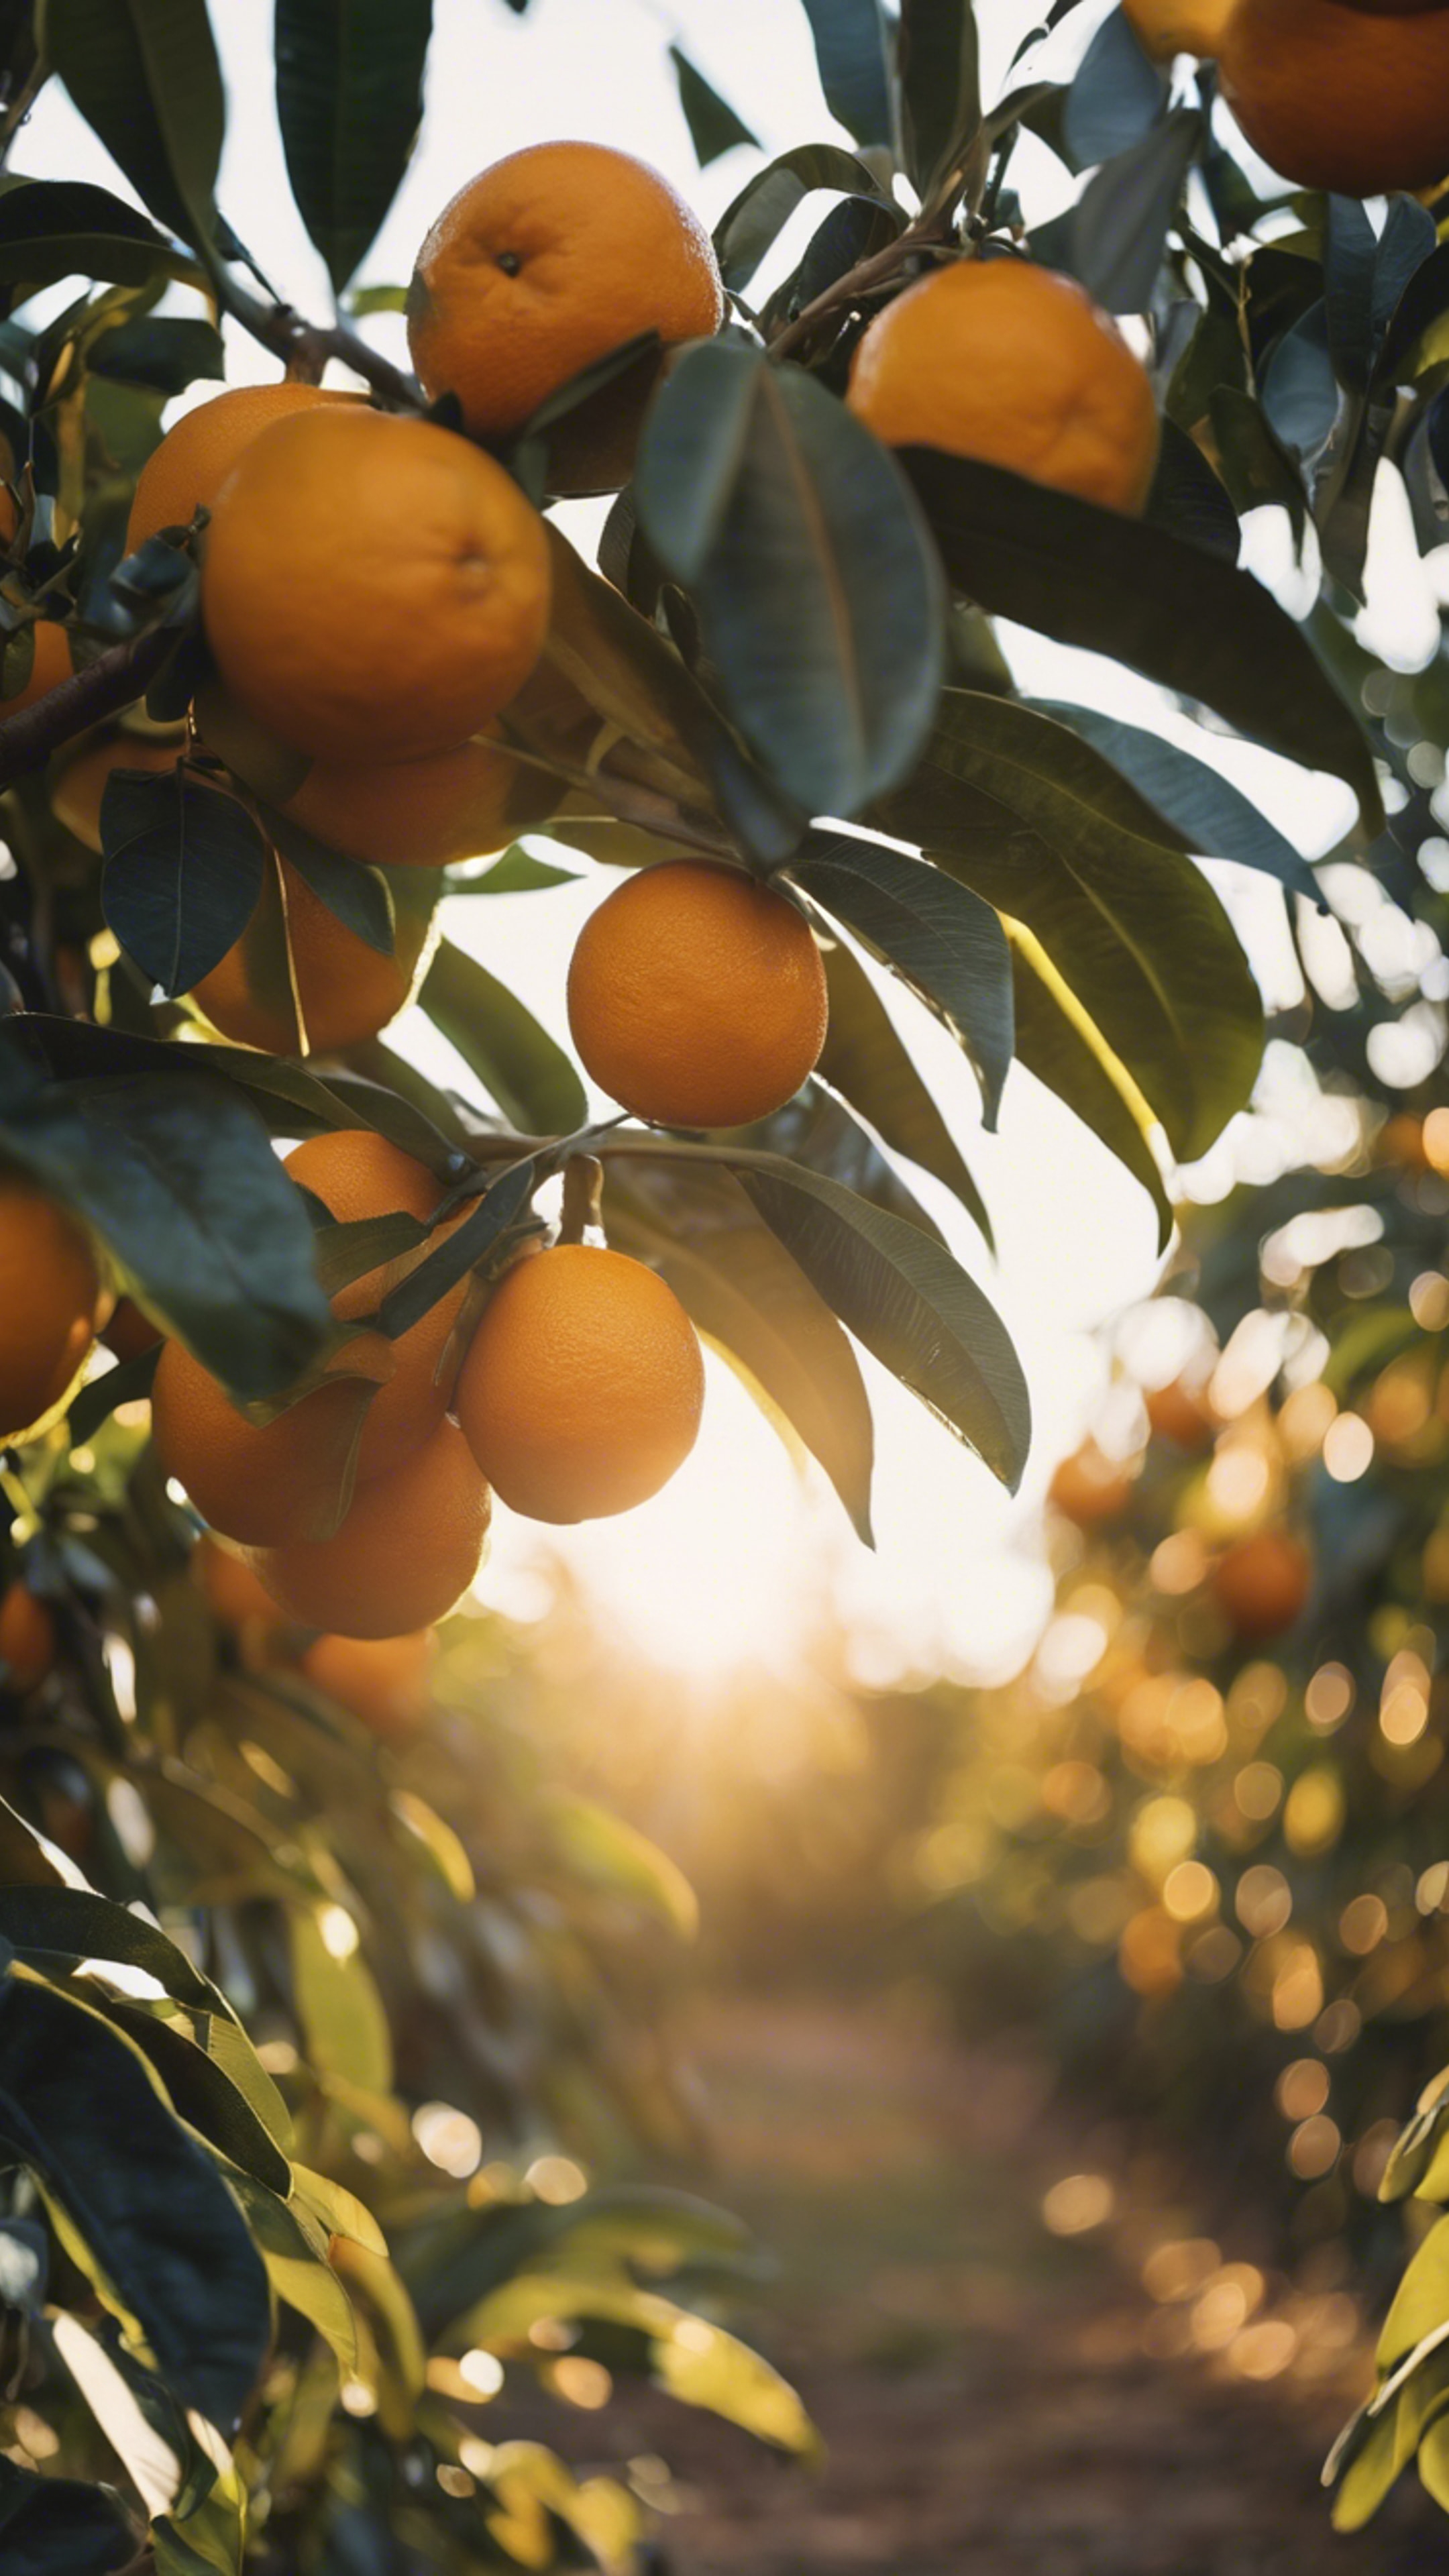 An orange grove in central Florida, with the sun casting a golden hue over ripe oranges ready for harvest. Tapet[4bbebc31cb8441e2b681]